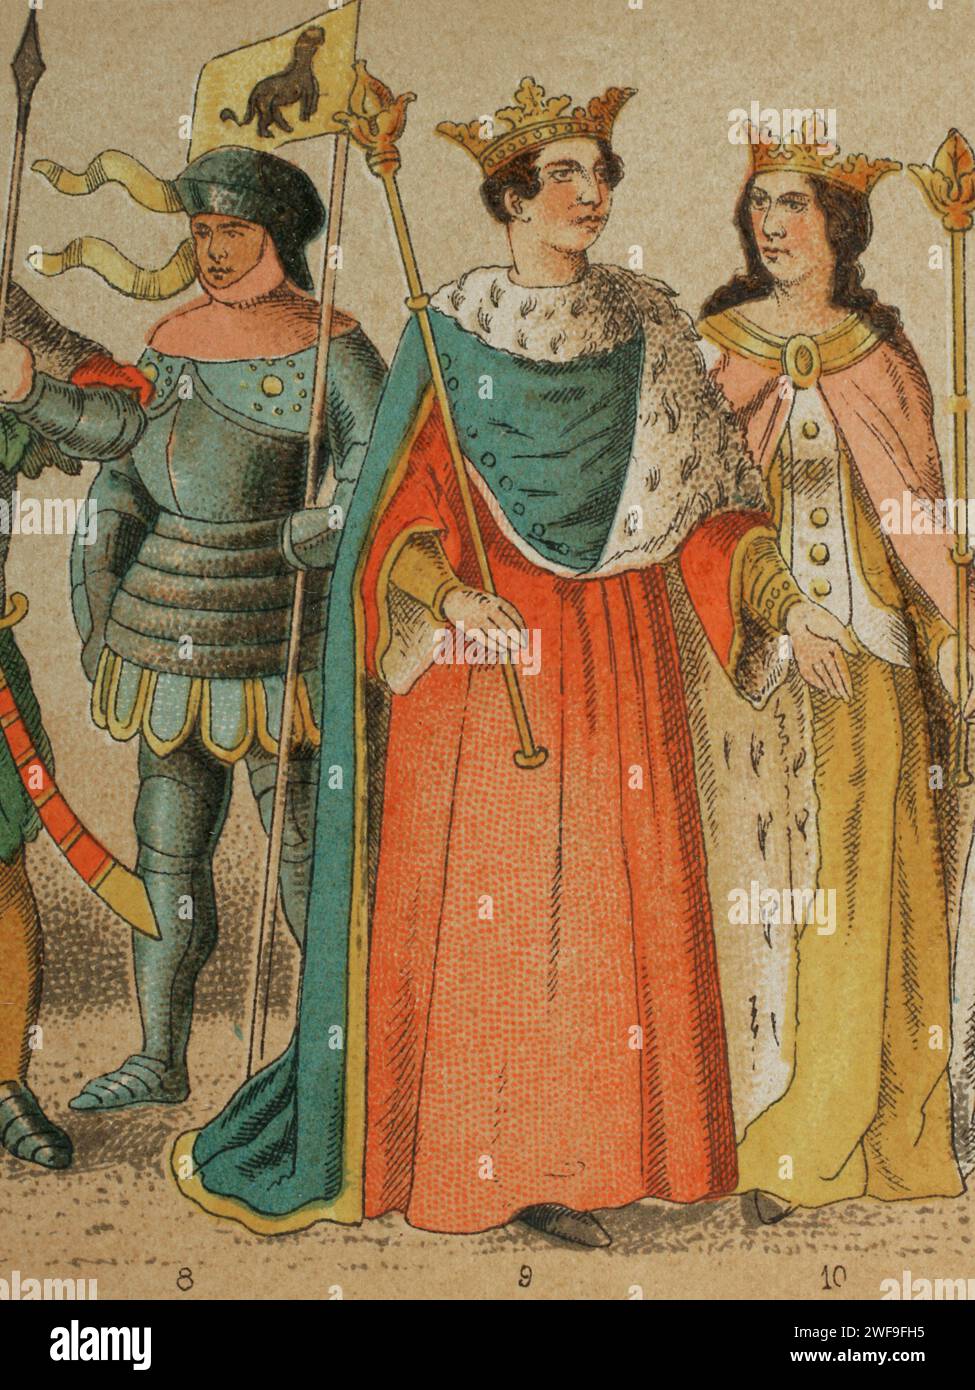 History of England. 1400-1450. From left to right, 8: knight, 9: King Henry VI of England (1421-1471), 10: Margaret of Anjou (1430-1482), wife of King Henry VI. Chromolithography. 'Historia Universal', by César Cantú. Volume VI, 1885. Stock Photo